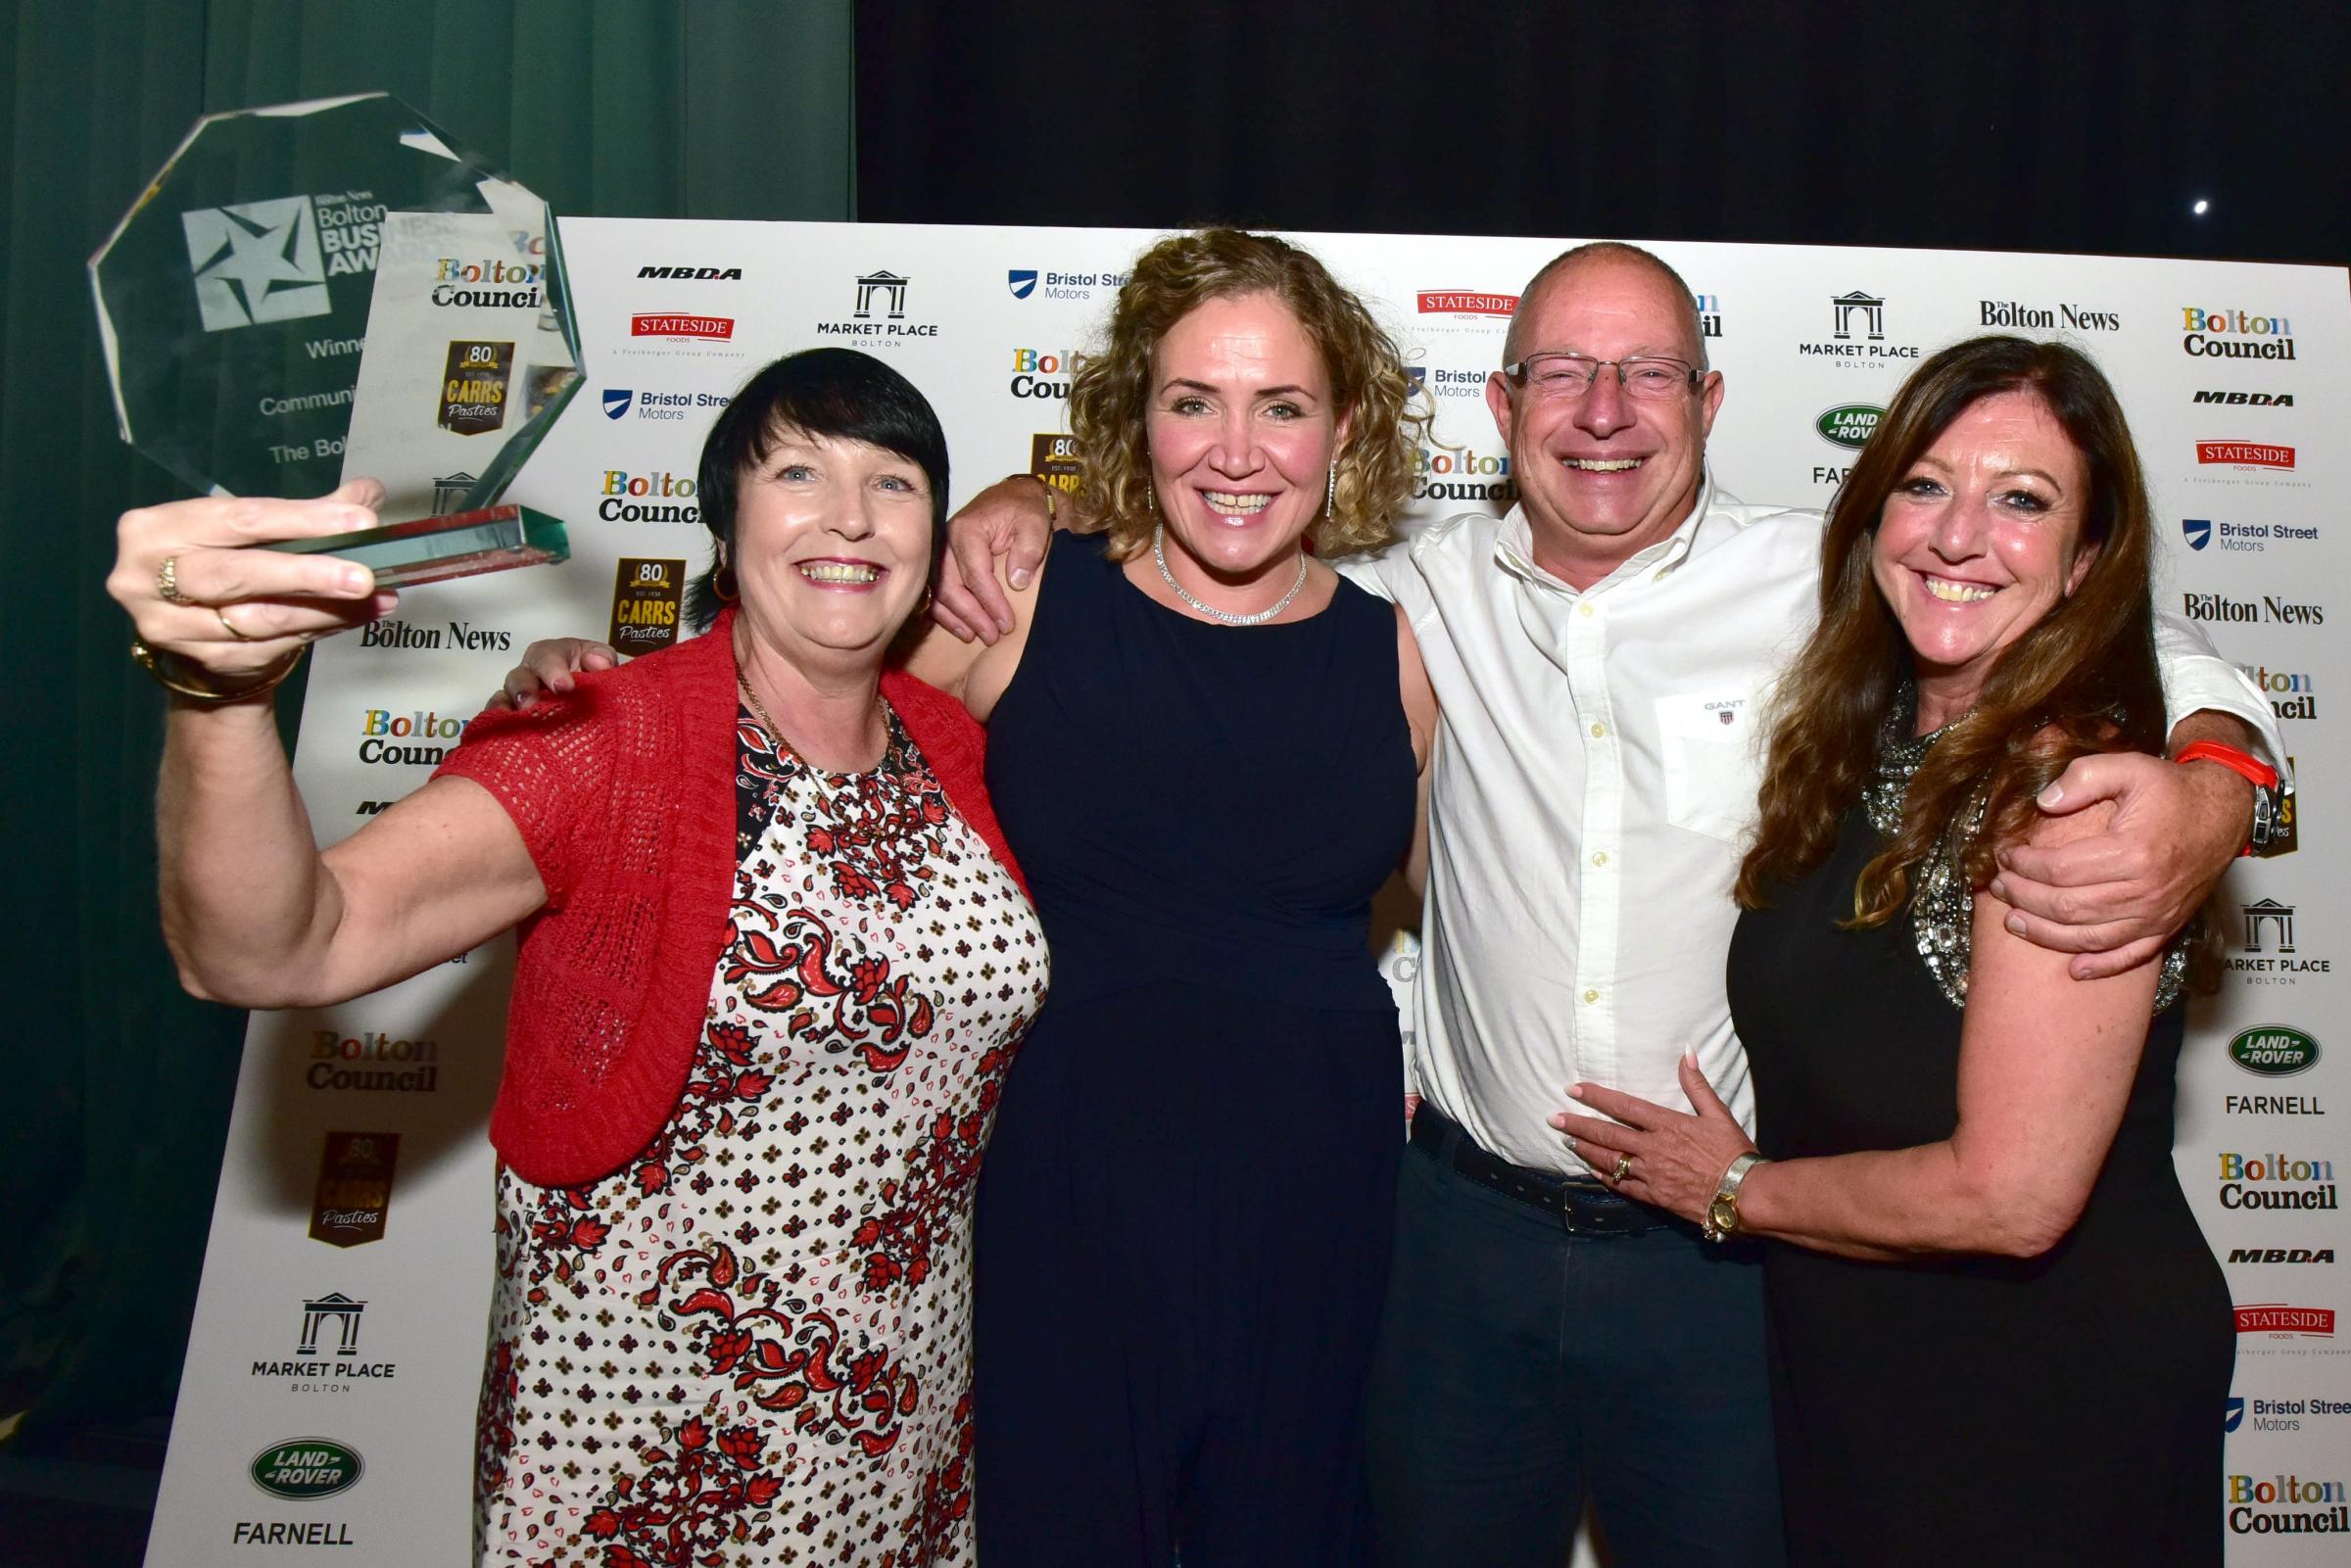 Bolton Business Awards helped 'make a difference locally' say winners